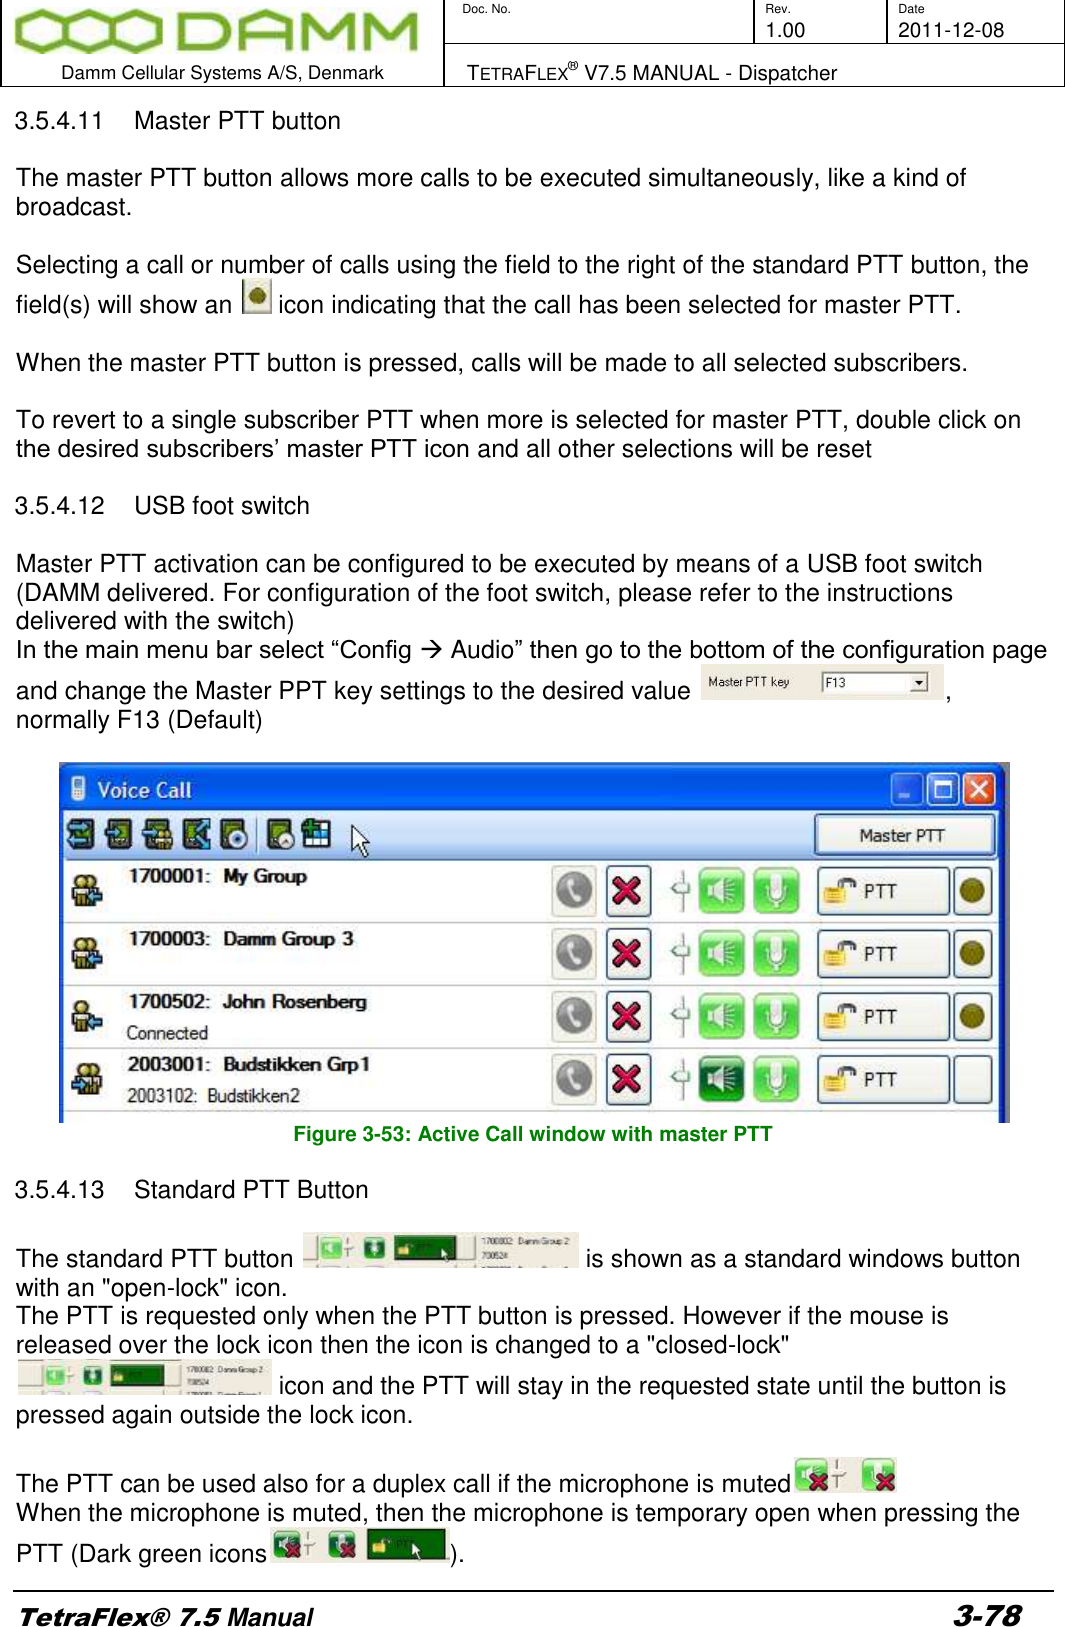        Doc. No. Rev. Date     1.00 2011-12-08  Damm Cellular Systems A/S, Denmark   TETRAFLEX® V7.5 MANUAL - Dispatcher  TetraFlex® 7.5 Manual 3-78 3.5.4.11  Master PTT button  The master PTT button allows more calls to be executed simultaneously, like a kind of broadcast.  Selecting a call or number of calls using the field to the right of the standard PTT button, the field(s) will show an   icon indicating that the call has been selected for master PTT.  When the master PTT button is pressed, calls will be made to all selected subscribers.  To revert to a single subscriber PTT when more is selected for master PTT, double click on the desired subscribers’ master PTT icon and all other selections will be reset  3.5.4.12  USB foot switch  Master PTT activation can be configured to be executed by means of a USB foot switch (DAMM delivered. For configuration of the foot switch, please refer to the instructions delivered with the switch) In the main menu bar select “Config  Audio” then go to the bottom of the configuration page and change the Master PPT key settings to the desired value  , normally F13 (Default)   Figure 3-53: Active Call window with master PTT  3.5.4.13  Standard PTT Button  The standard PTT button   is shown as a standard windows button with an &quot;open-lock&quot; icon. The PTT is requested only when the PTT button is pressed. However if the mouse is released over the lock icon then the icon is changed to a &quot;closed-lock&quot;  icon and the PTT will stay in the requested state until the button is pressed again outside the lock icon.  The PTT can be used also for a duplex call if the microphone is muted  When the microphone is muted, then the microphone is temporary open when pressing the PTT (Dark green icons ). 